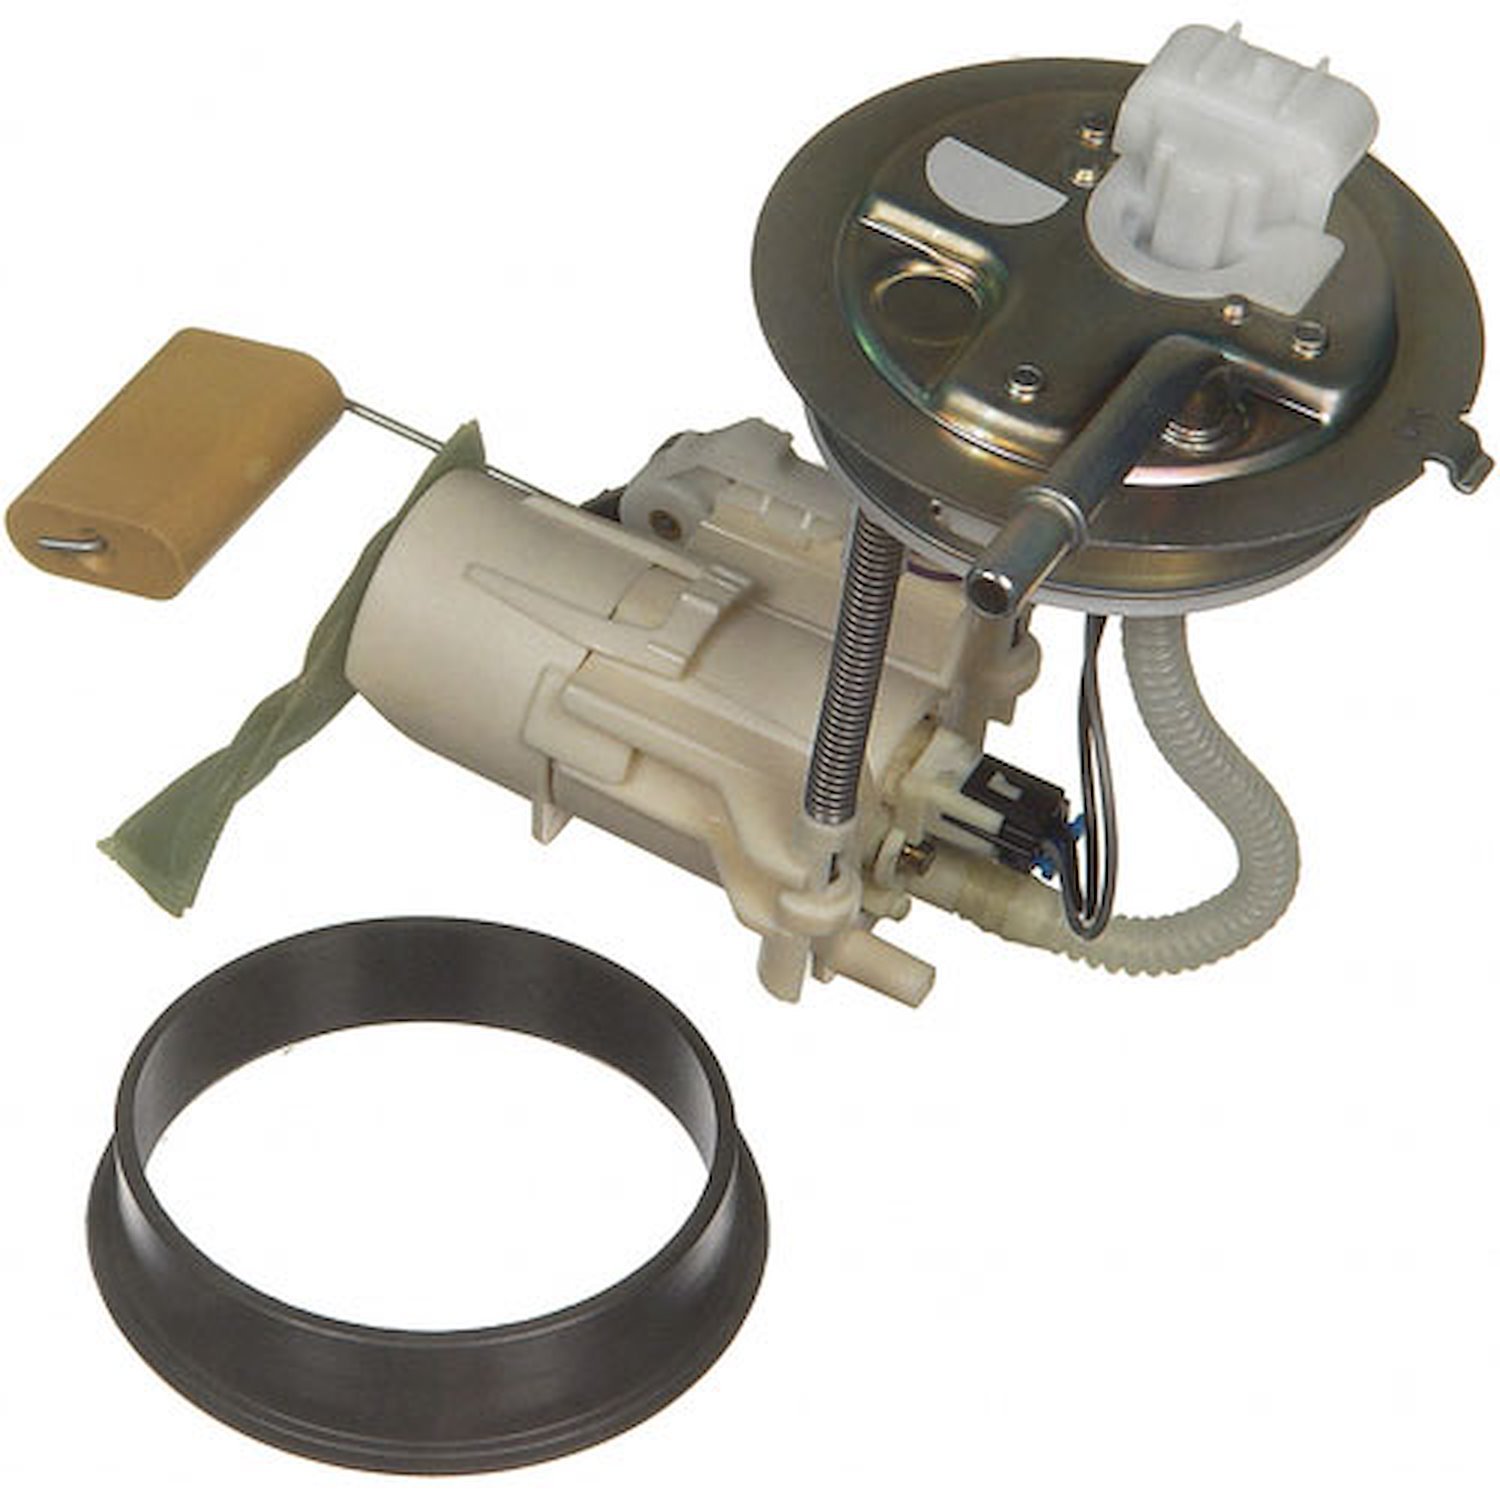 OE GM Replacement Electric Fuel Pump Module Assembly 2002-03 Chevrolet Avalanche 2500/Suburban 2500 6.0L/8.1L V8